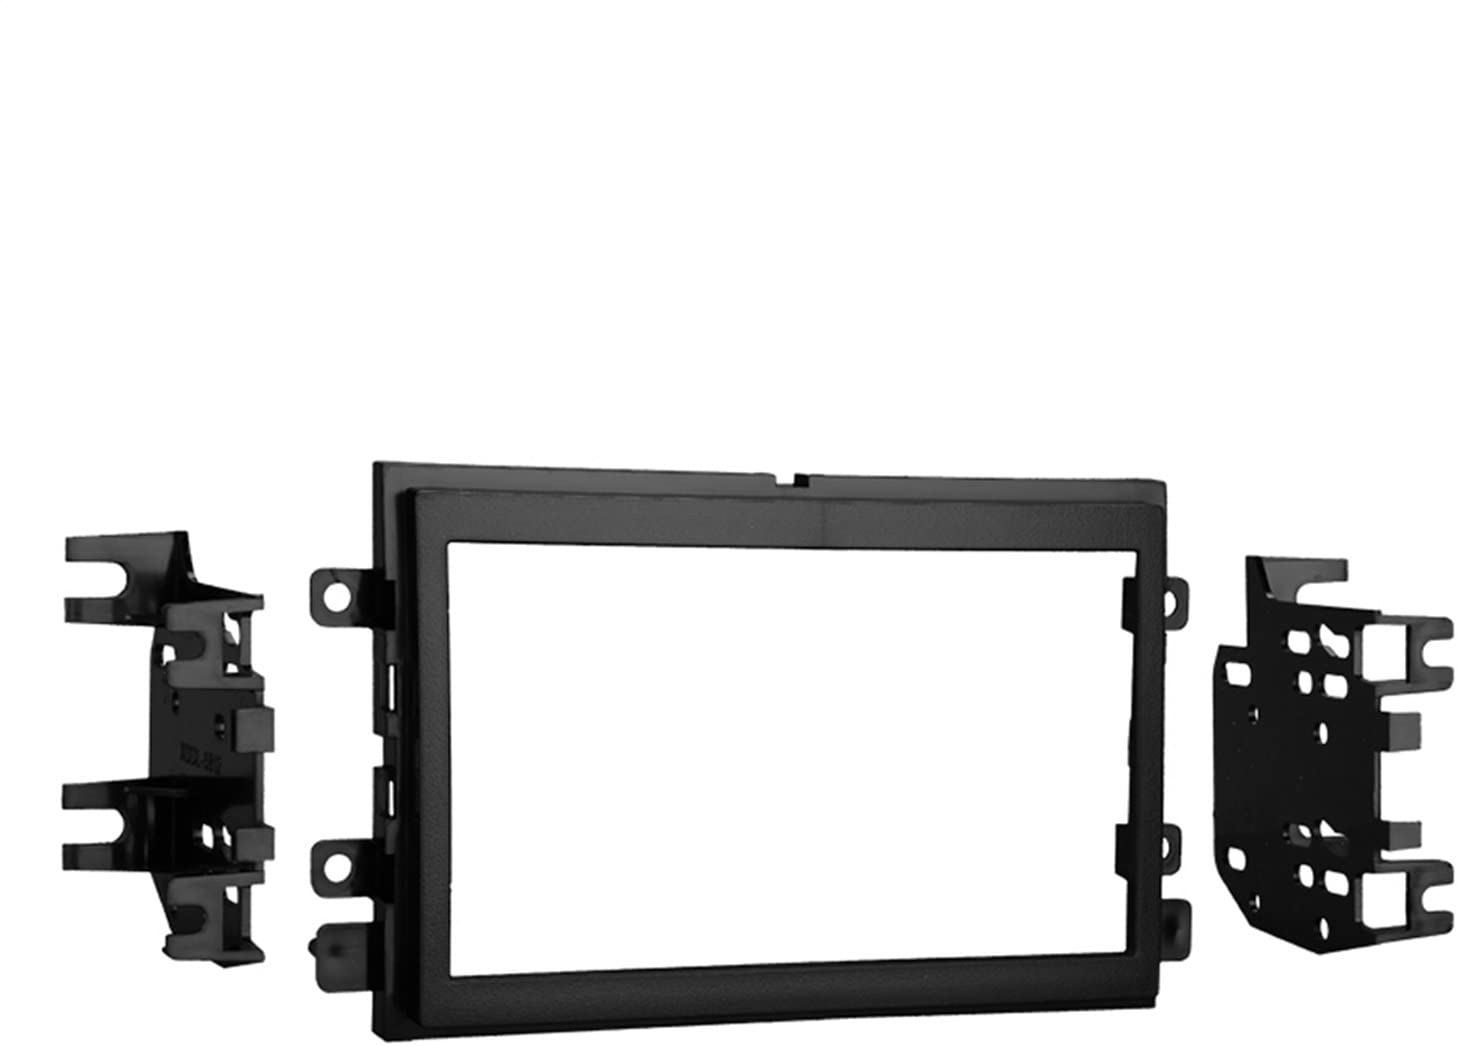 Metra 95-5812 Double DIN Installation Kit for Select 2004-up Ford Vehicles -Black (Installation Kit Standard Packaging)